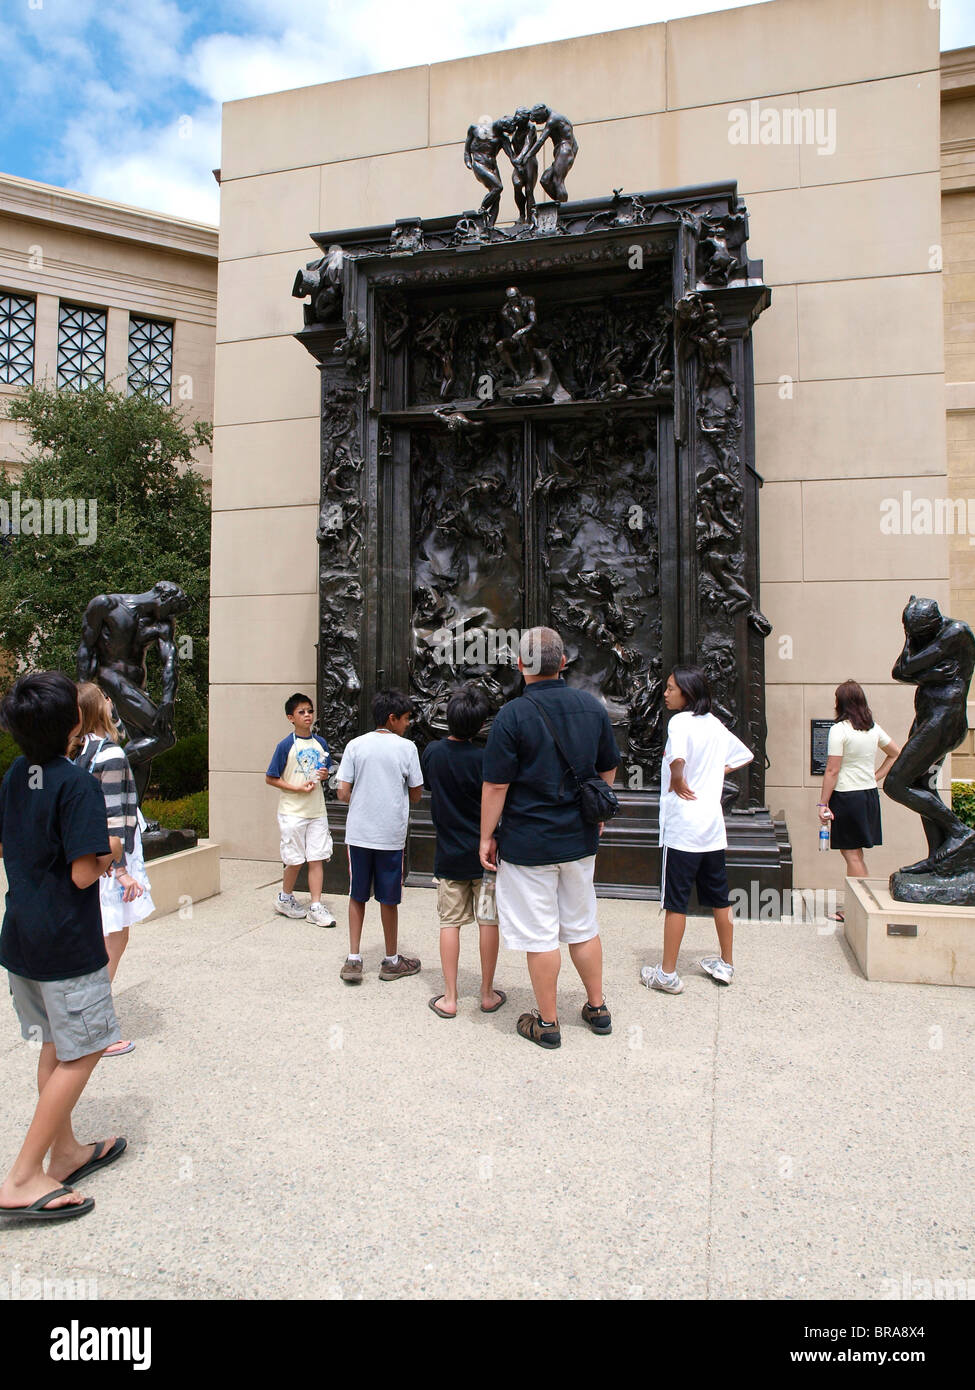 Rodin The Gates of Hell at the Iris & B. Gerald Cantor Center for Visual Arts at Stanford University Stock Photo